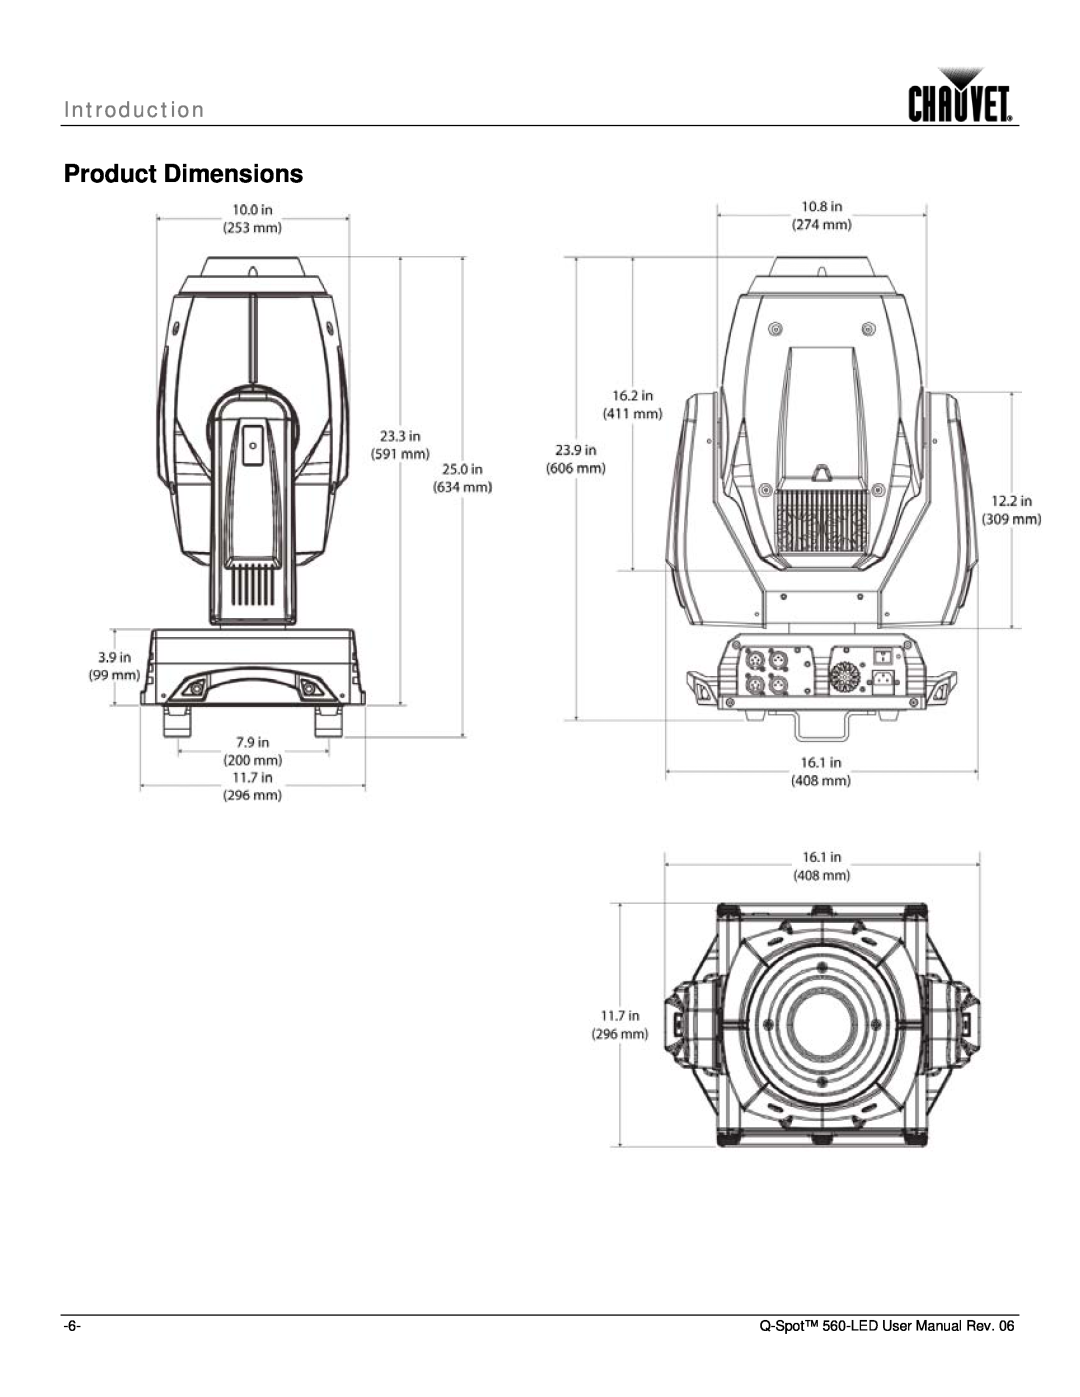 Chauvet 560 user manual Product Dimensions, Introduction 